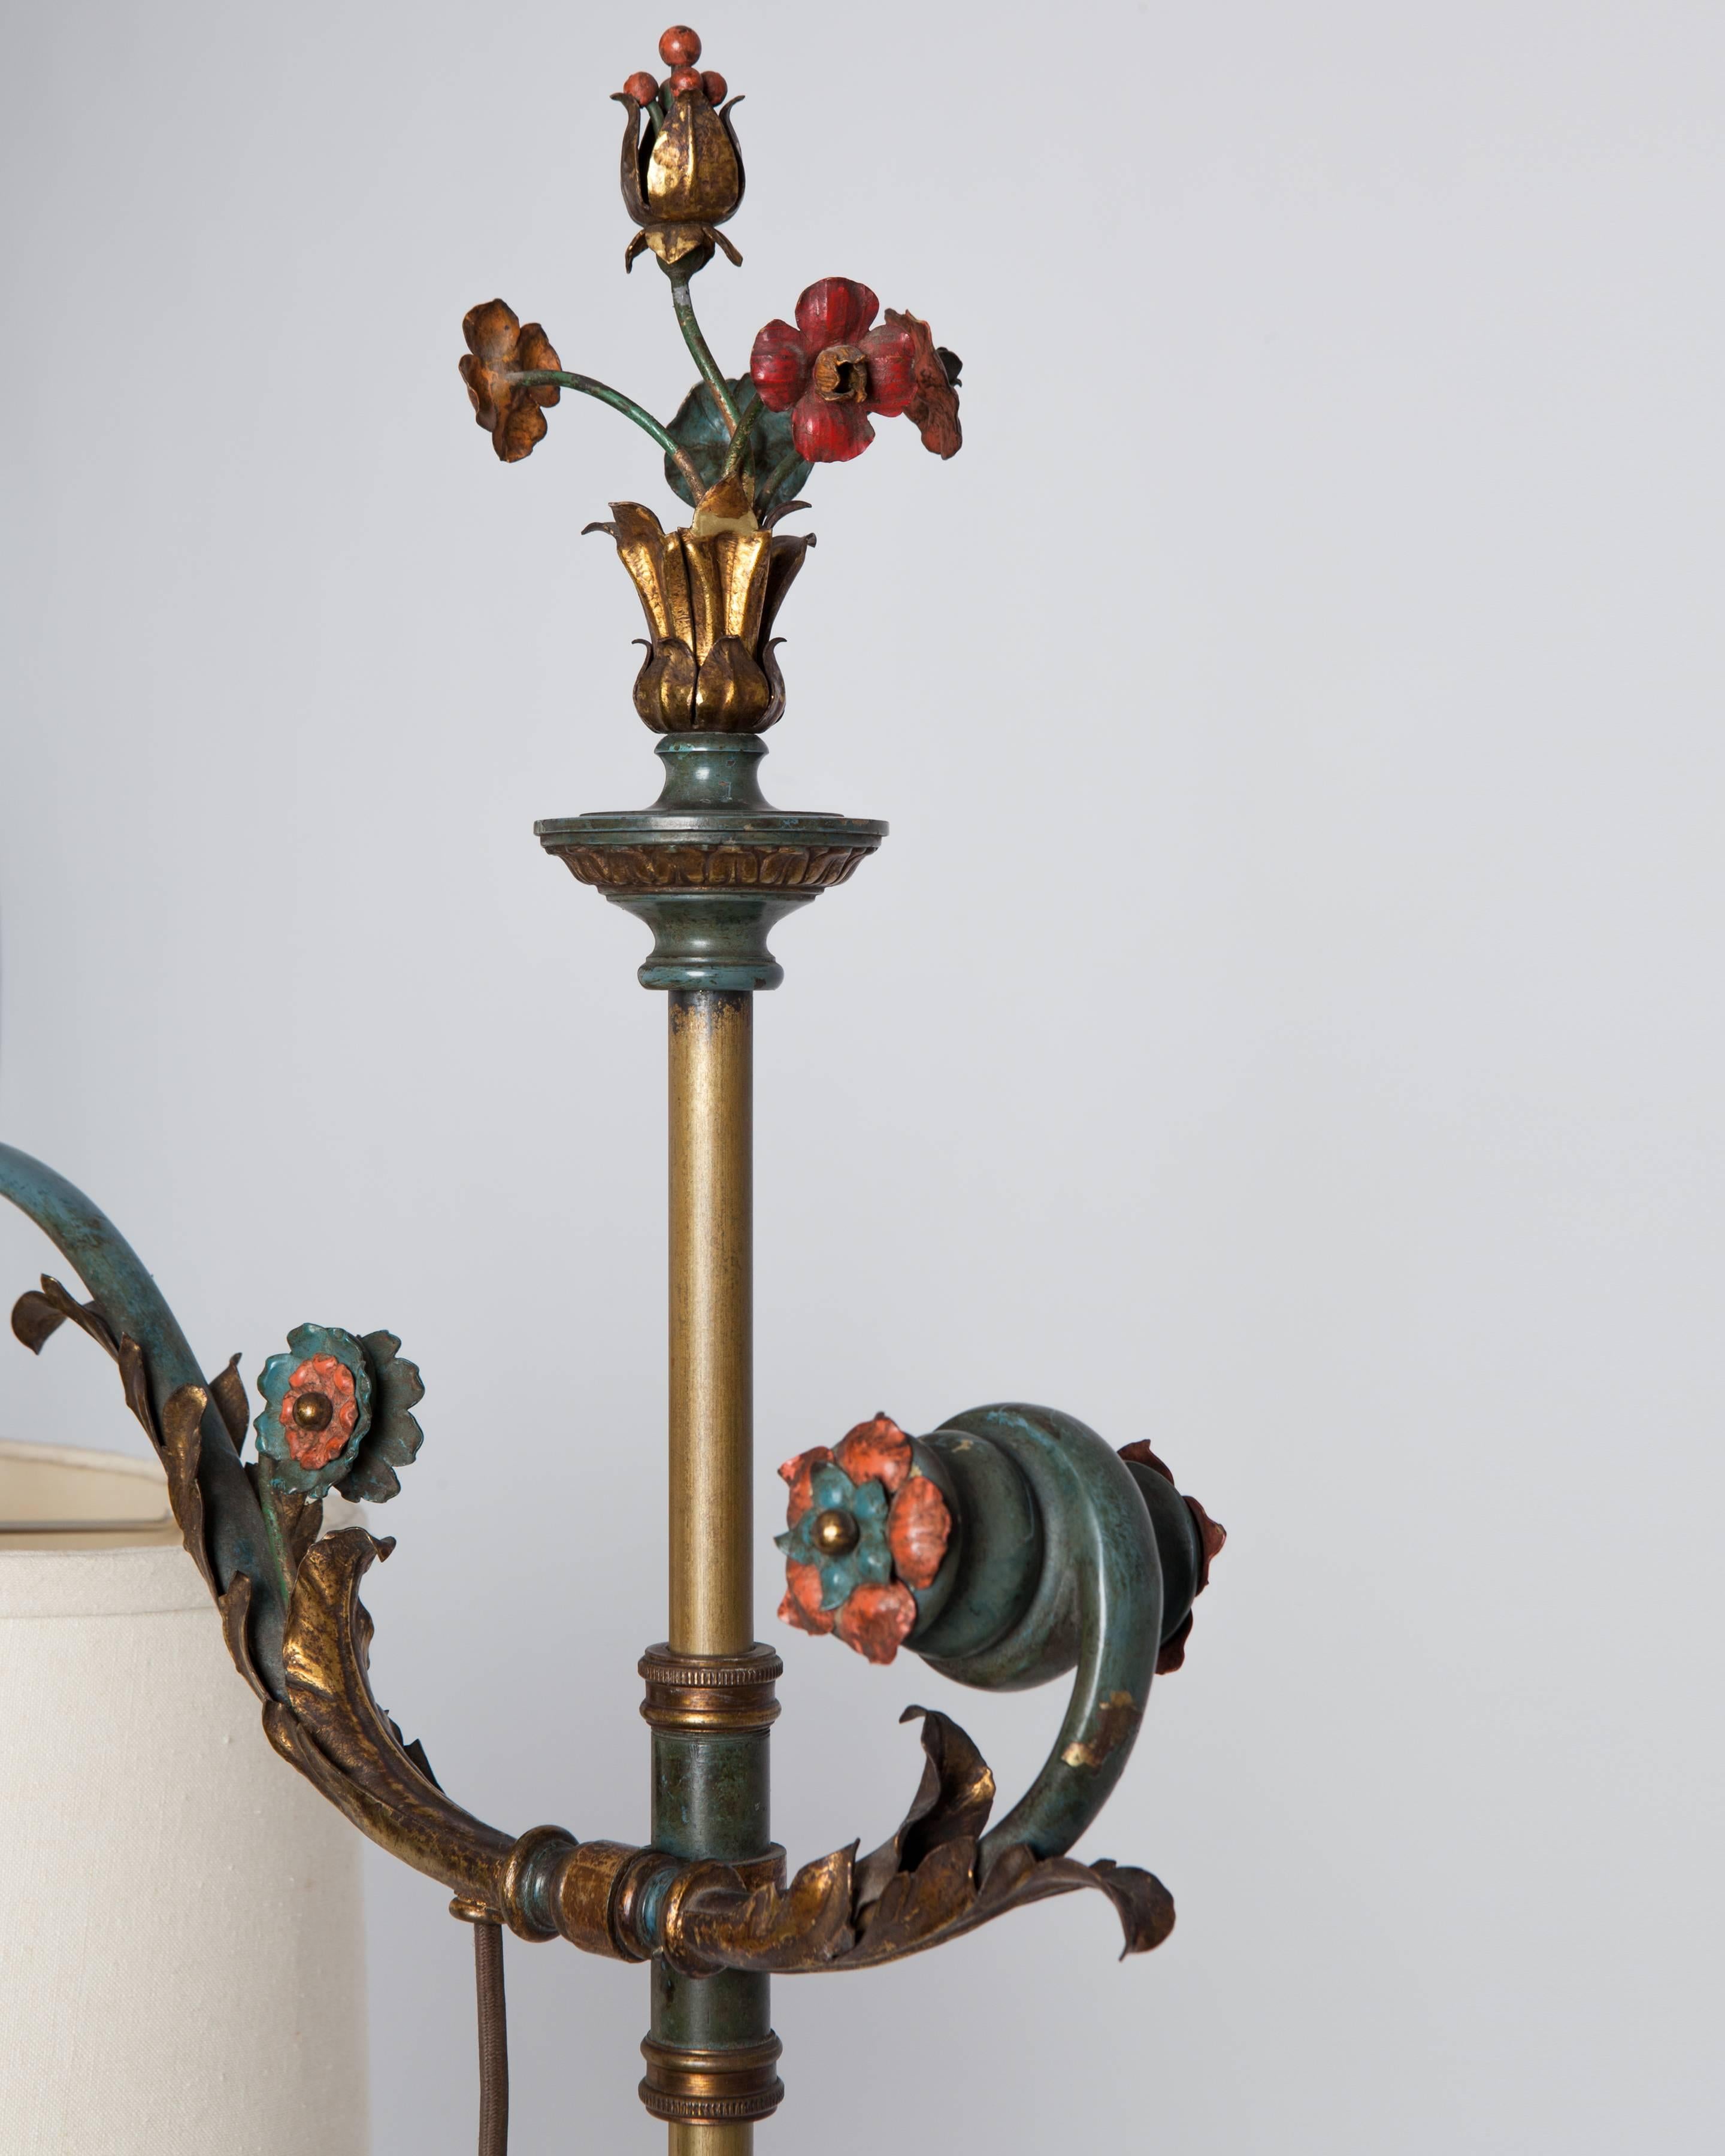 AFL1832.

An antique bronze bridge-arm floor lamp in its original pale blue and gilded finish. The arm pivots and adjusts in height by the New York maker Sterling Bronze Co. Shade not included.

Dimensions:
Overall (extended): 64-1/2